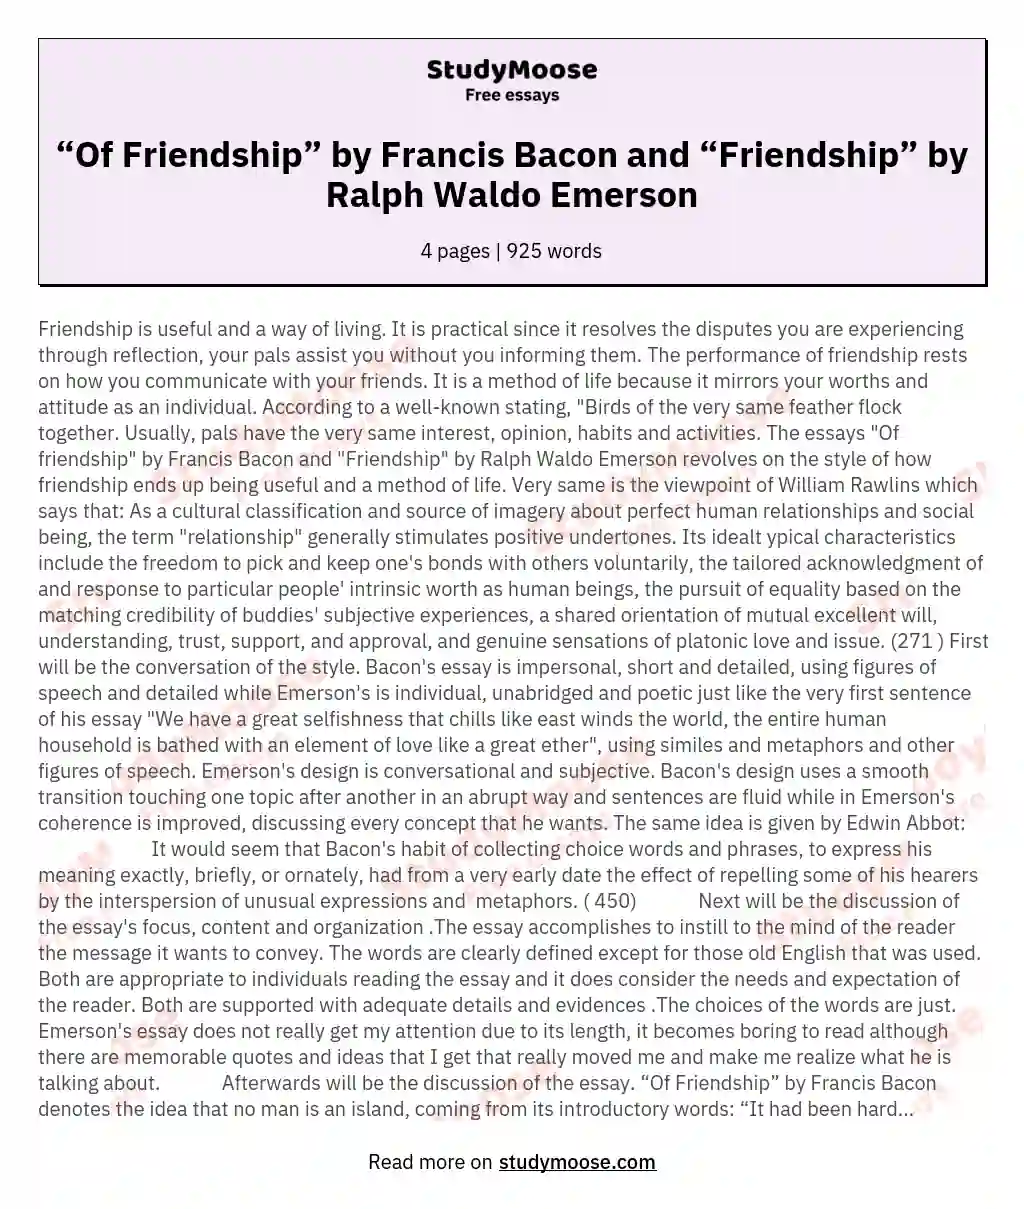 “Of Friendship” by Francis Bacon and “Friendship” by Ralph Waldo Emerson essay